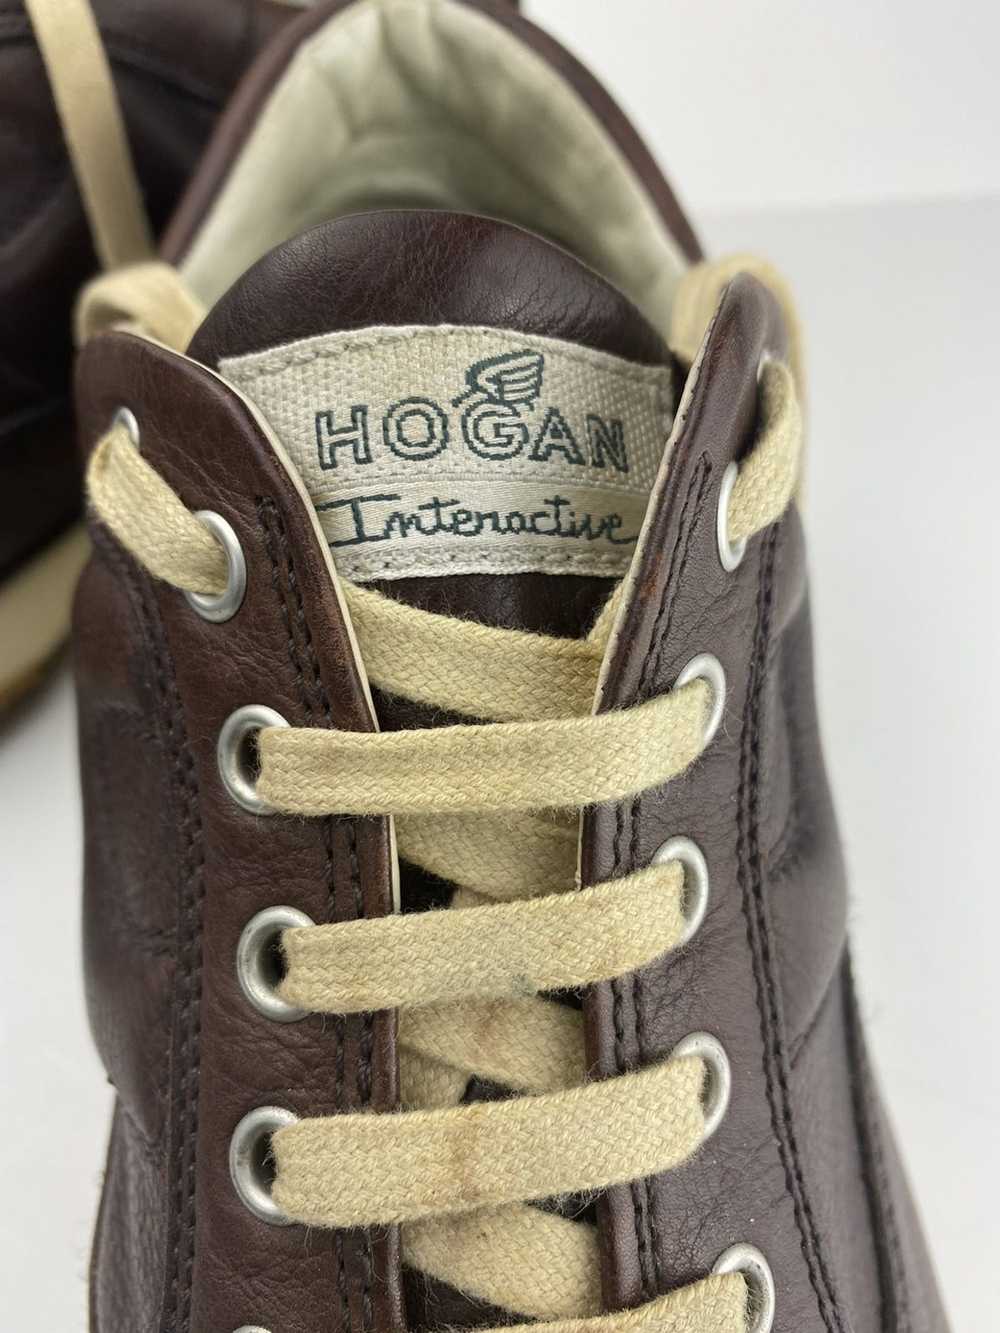 Hogan Hogan low Top Lace-Up Trainers Sneakers - image 7